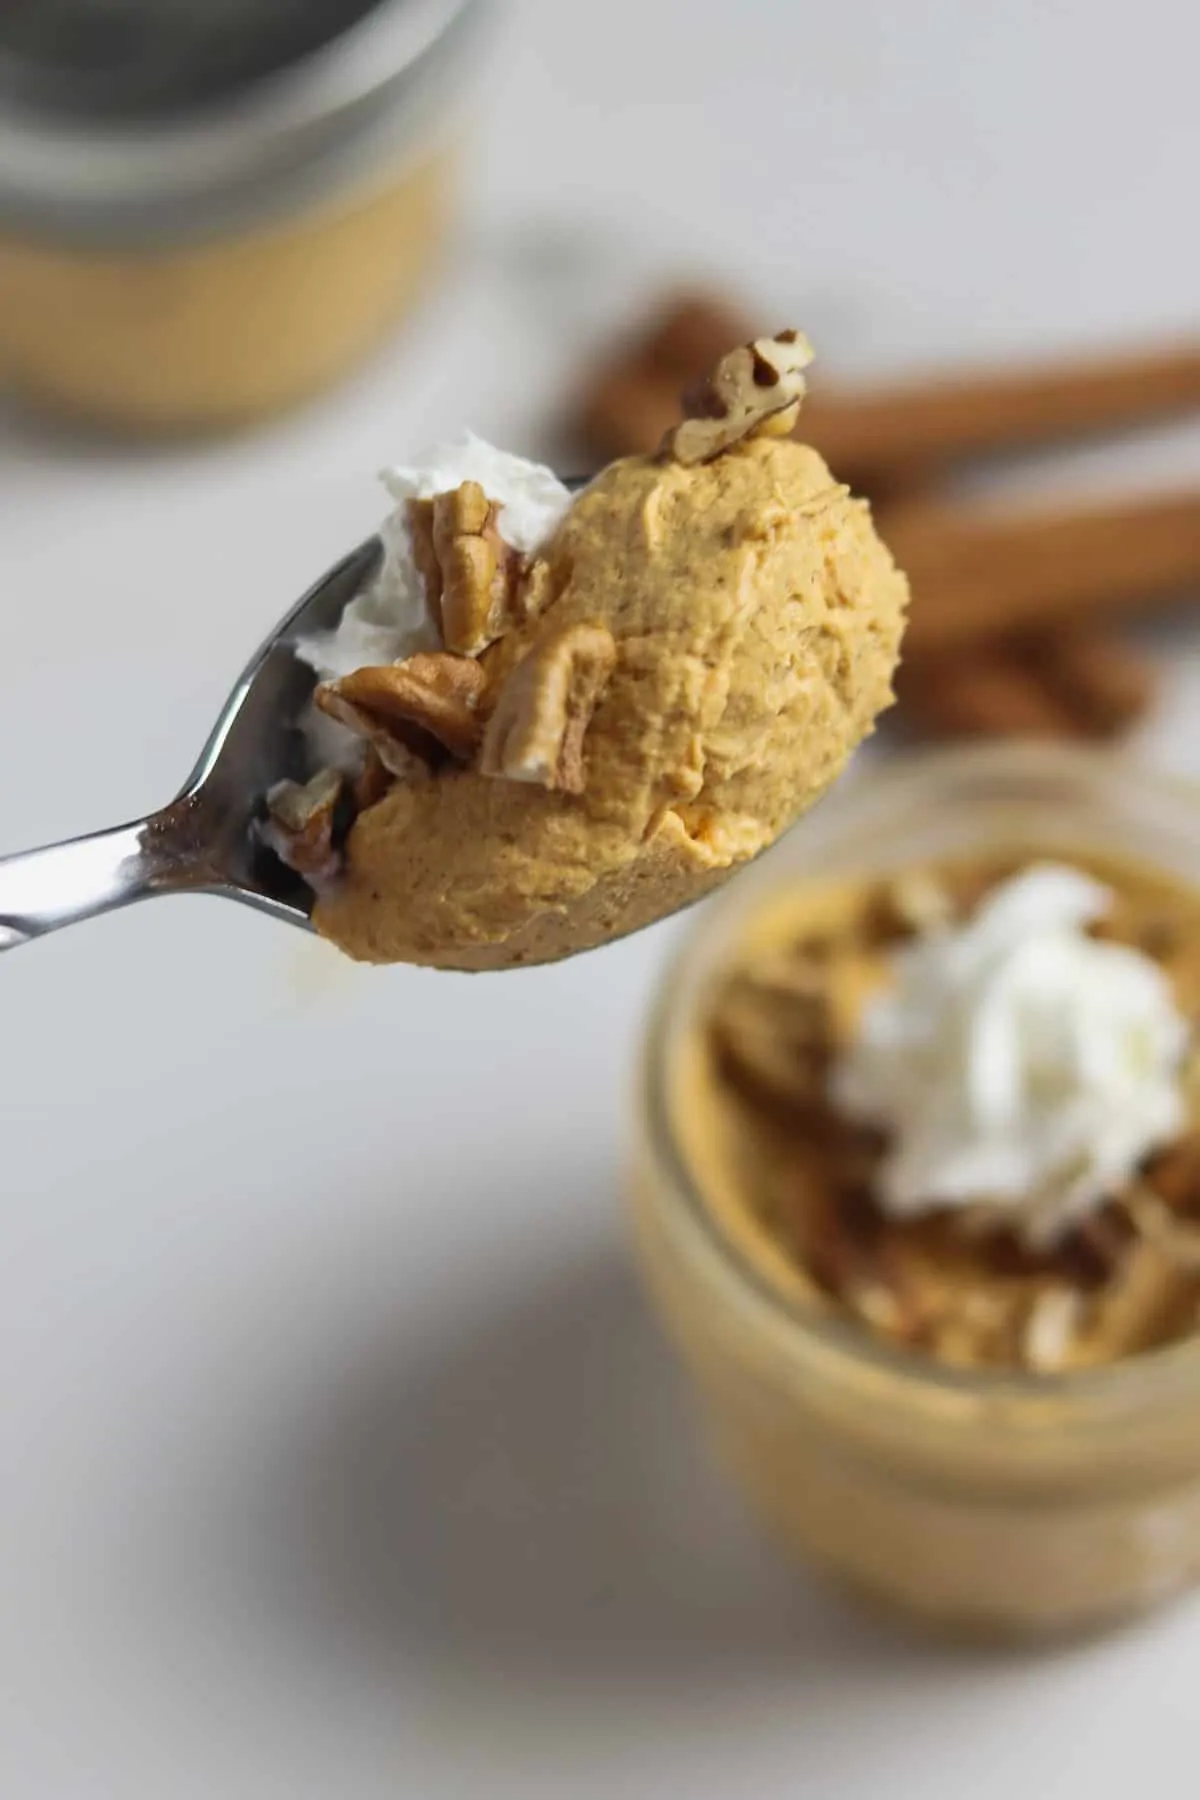 Low Calorie Weight Watchers Pumpkin Fluff Recipe - Mindy's Cooking Obsession